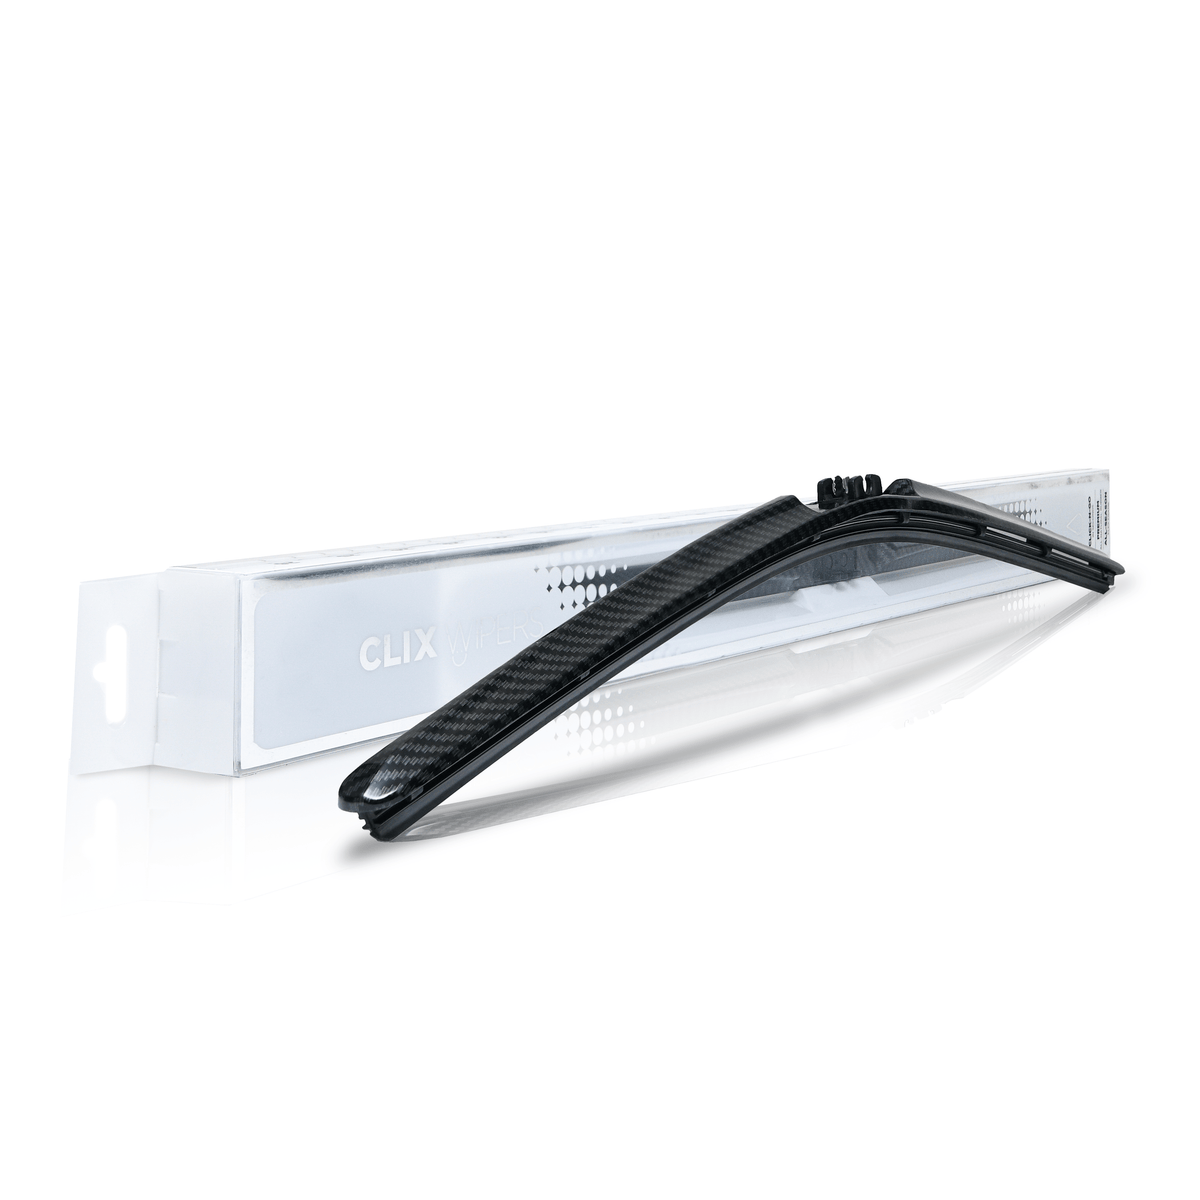 Common Questions About Wiper Blade Replacement